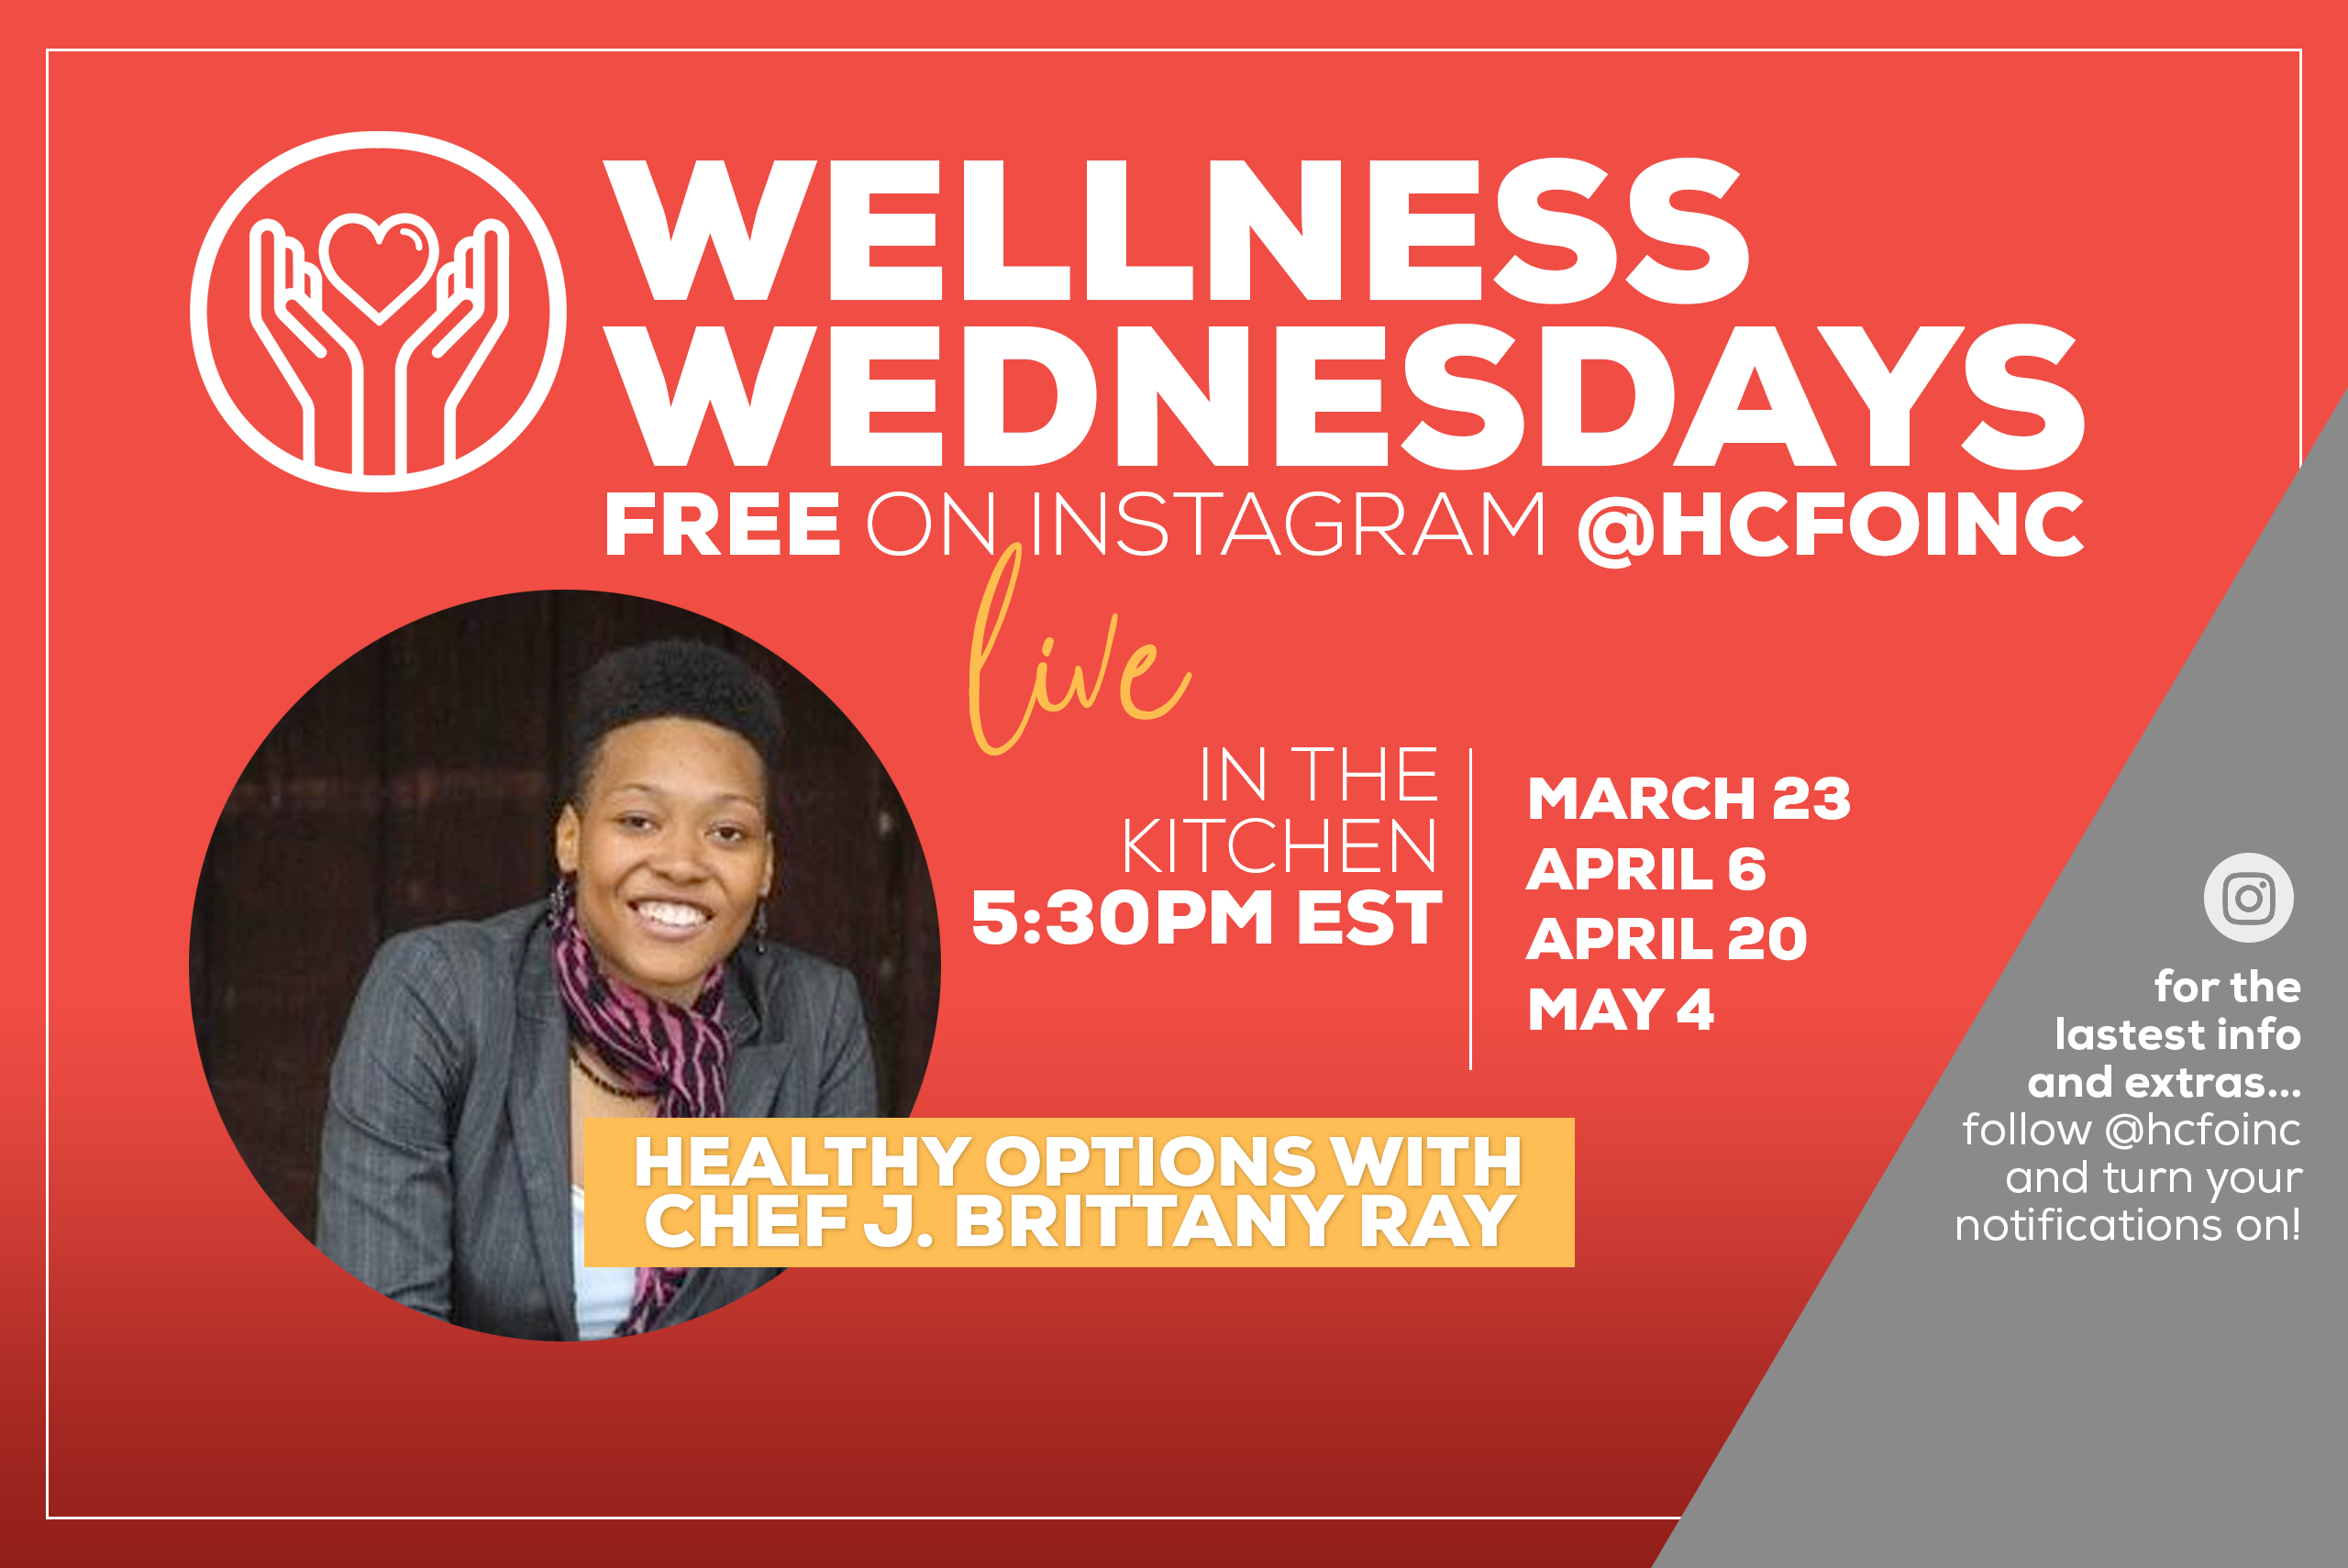 Wellness Wednesday Virtual Cooking Lessons with Chef J. Brittany Ray. Join Us Live on Instagram @hcfoinc